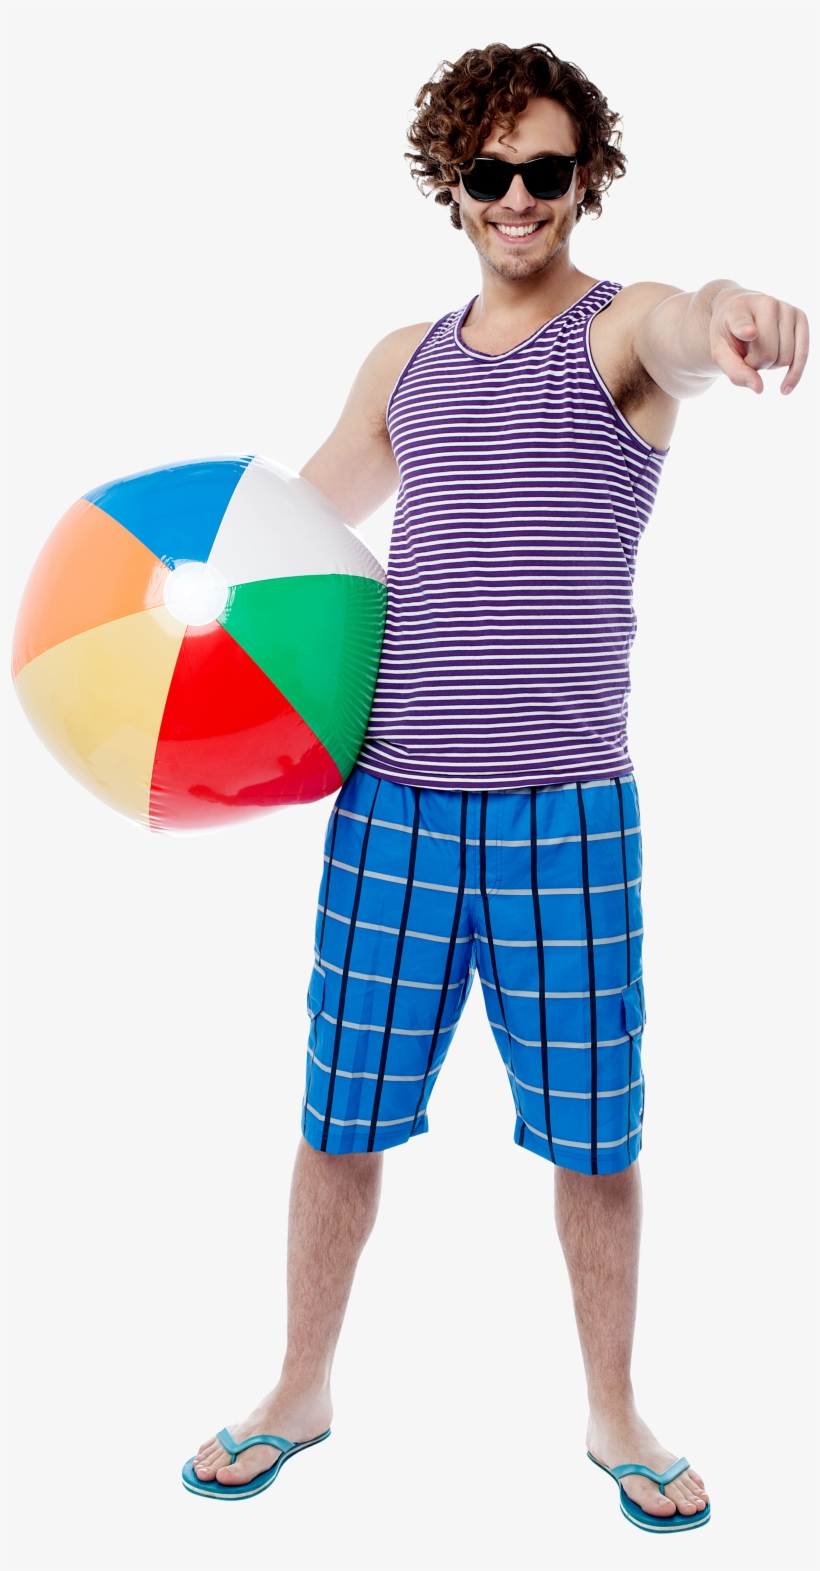 Men With Beach Ball Png Image - Guy Going To Beach, transparent png #2192949